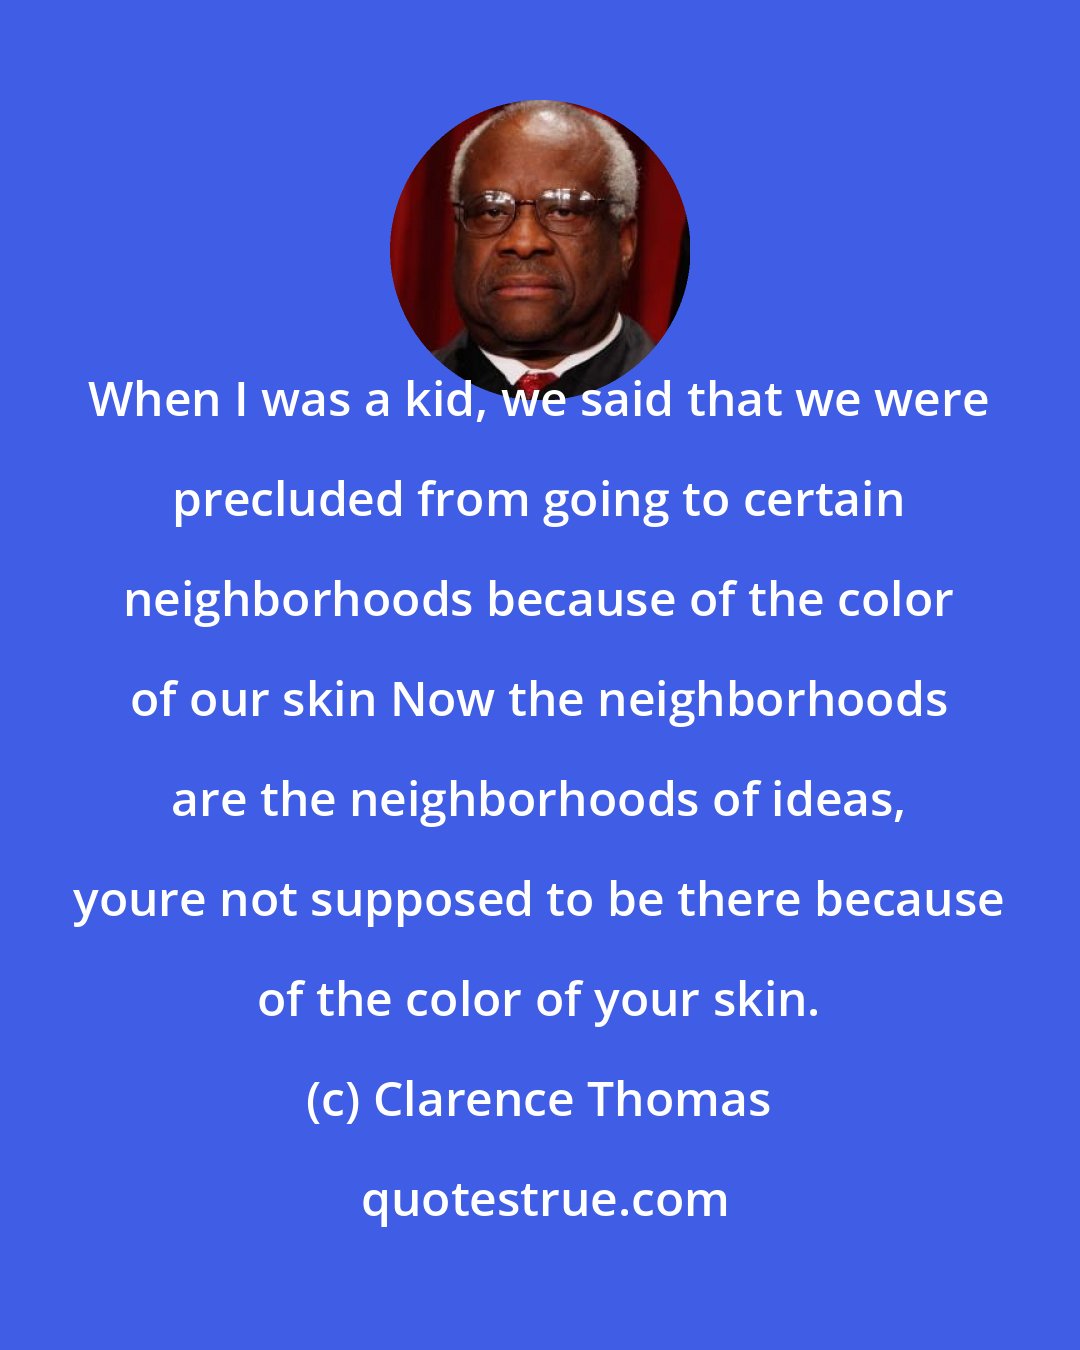 Clarence Thomas: When I was a kid, we said that we were precluded from going to certain neighborhoods because of the color of our skin Now the neighborhoods are the neighborhoods of ideas, youre not supposed to be there because of the color of your skin.